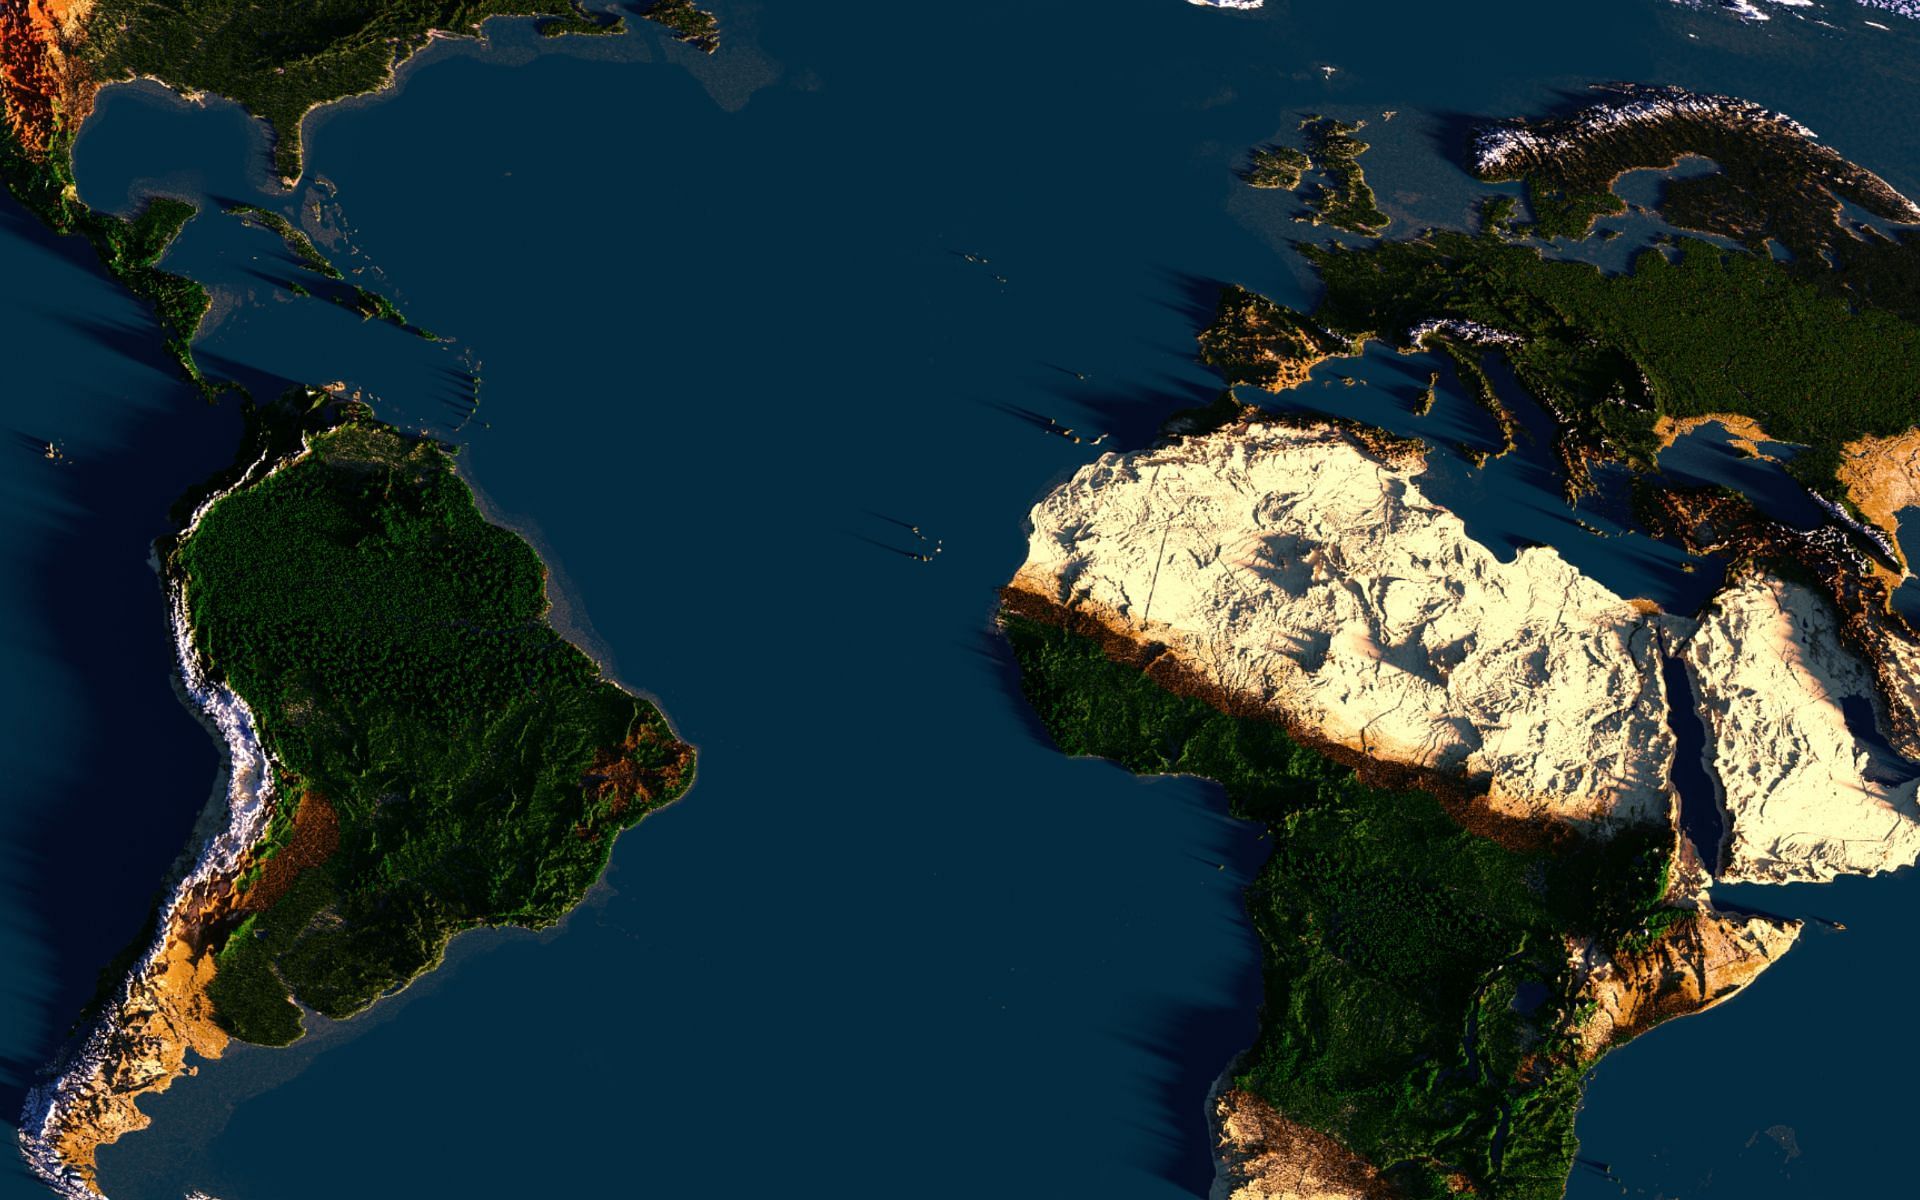 One of the many images of the earth from the Minecraft Earth Map project (Image via Minecraft Earth Map)